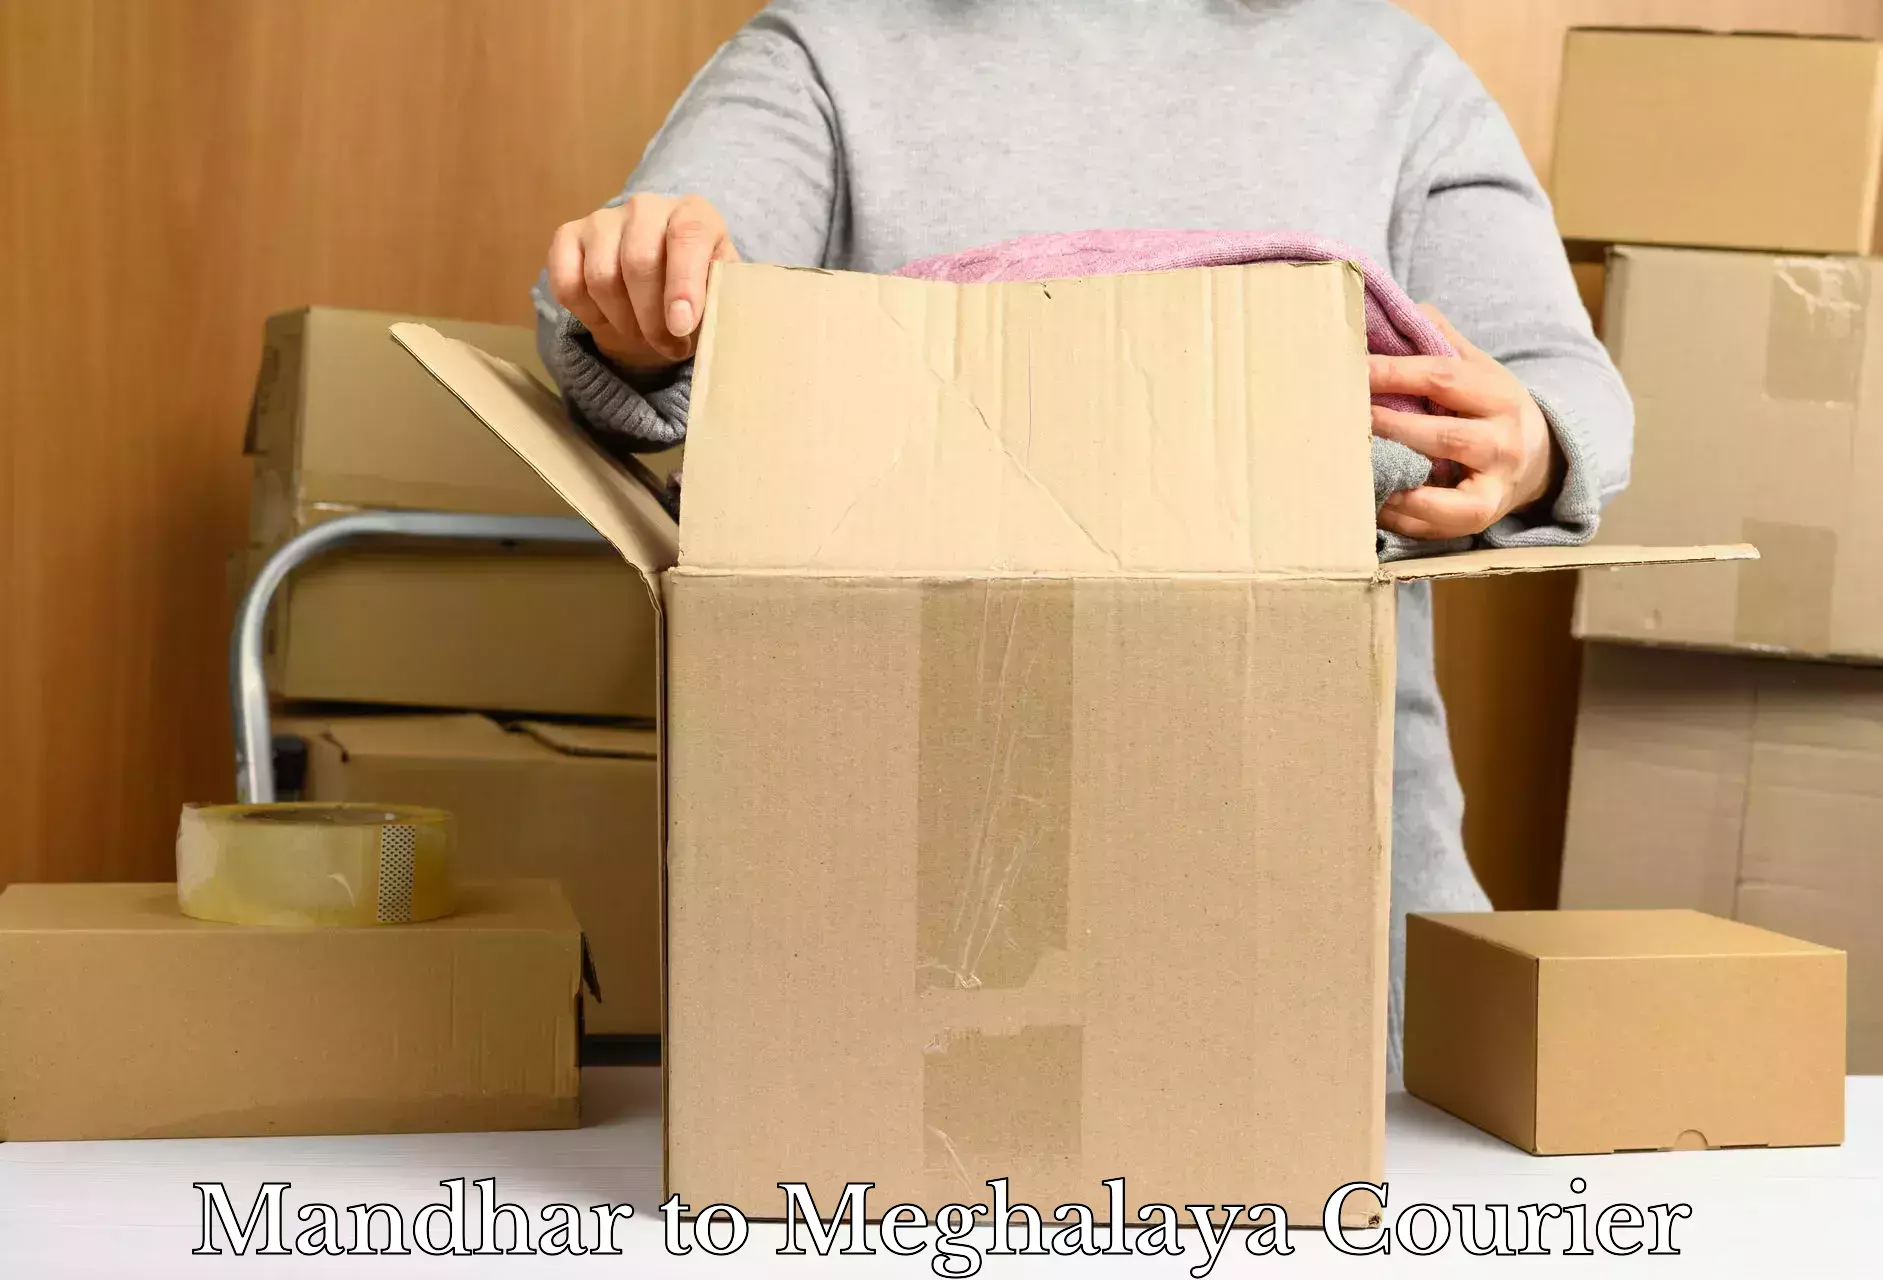 Reliable relocation services Mandhar to Shillong